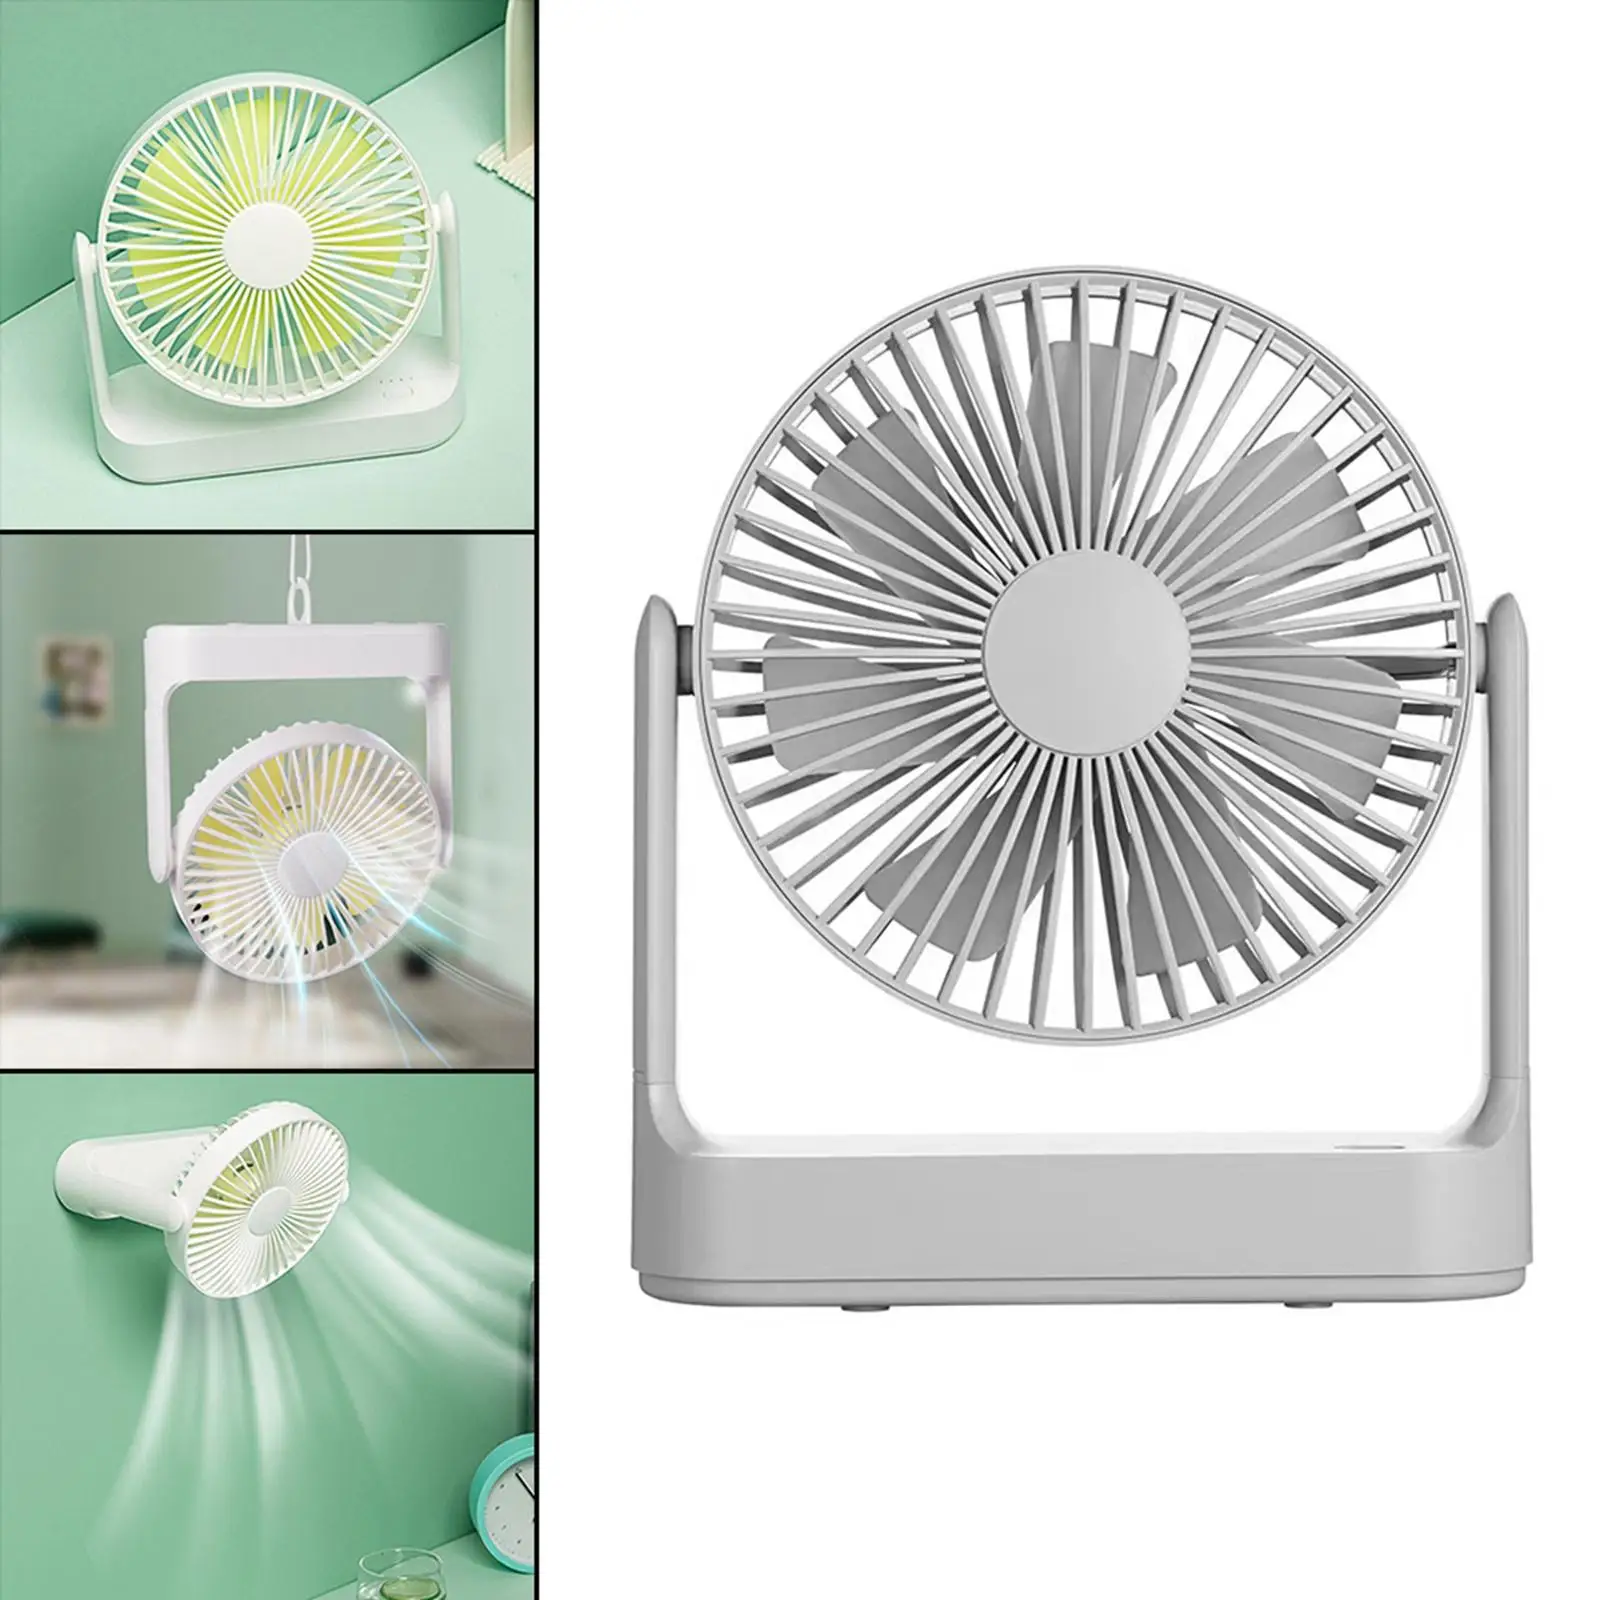 Portable Personal Table Fan USB Corded Wall Mounted Fodable Cooling Air Circulator Space Saving Strong Wind for Bedroom Gray